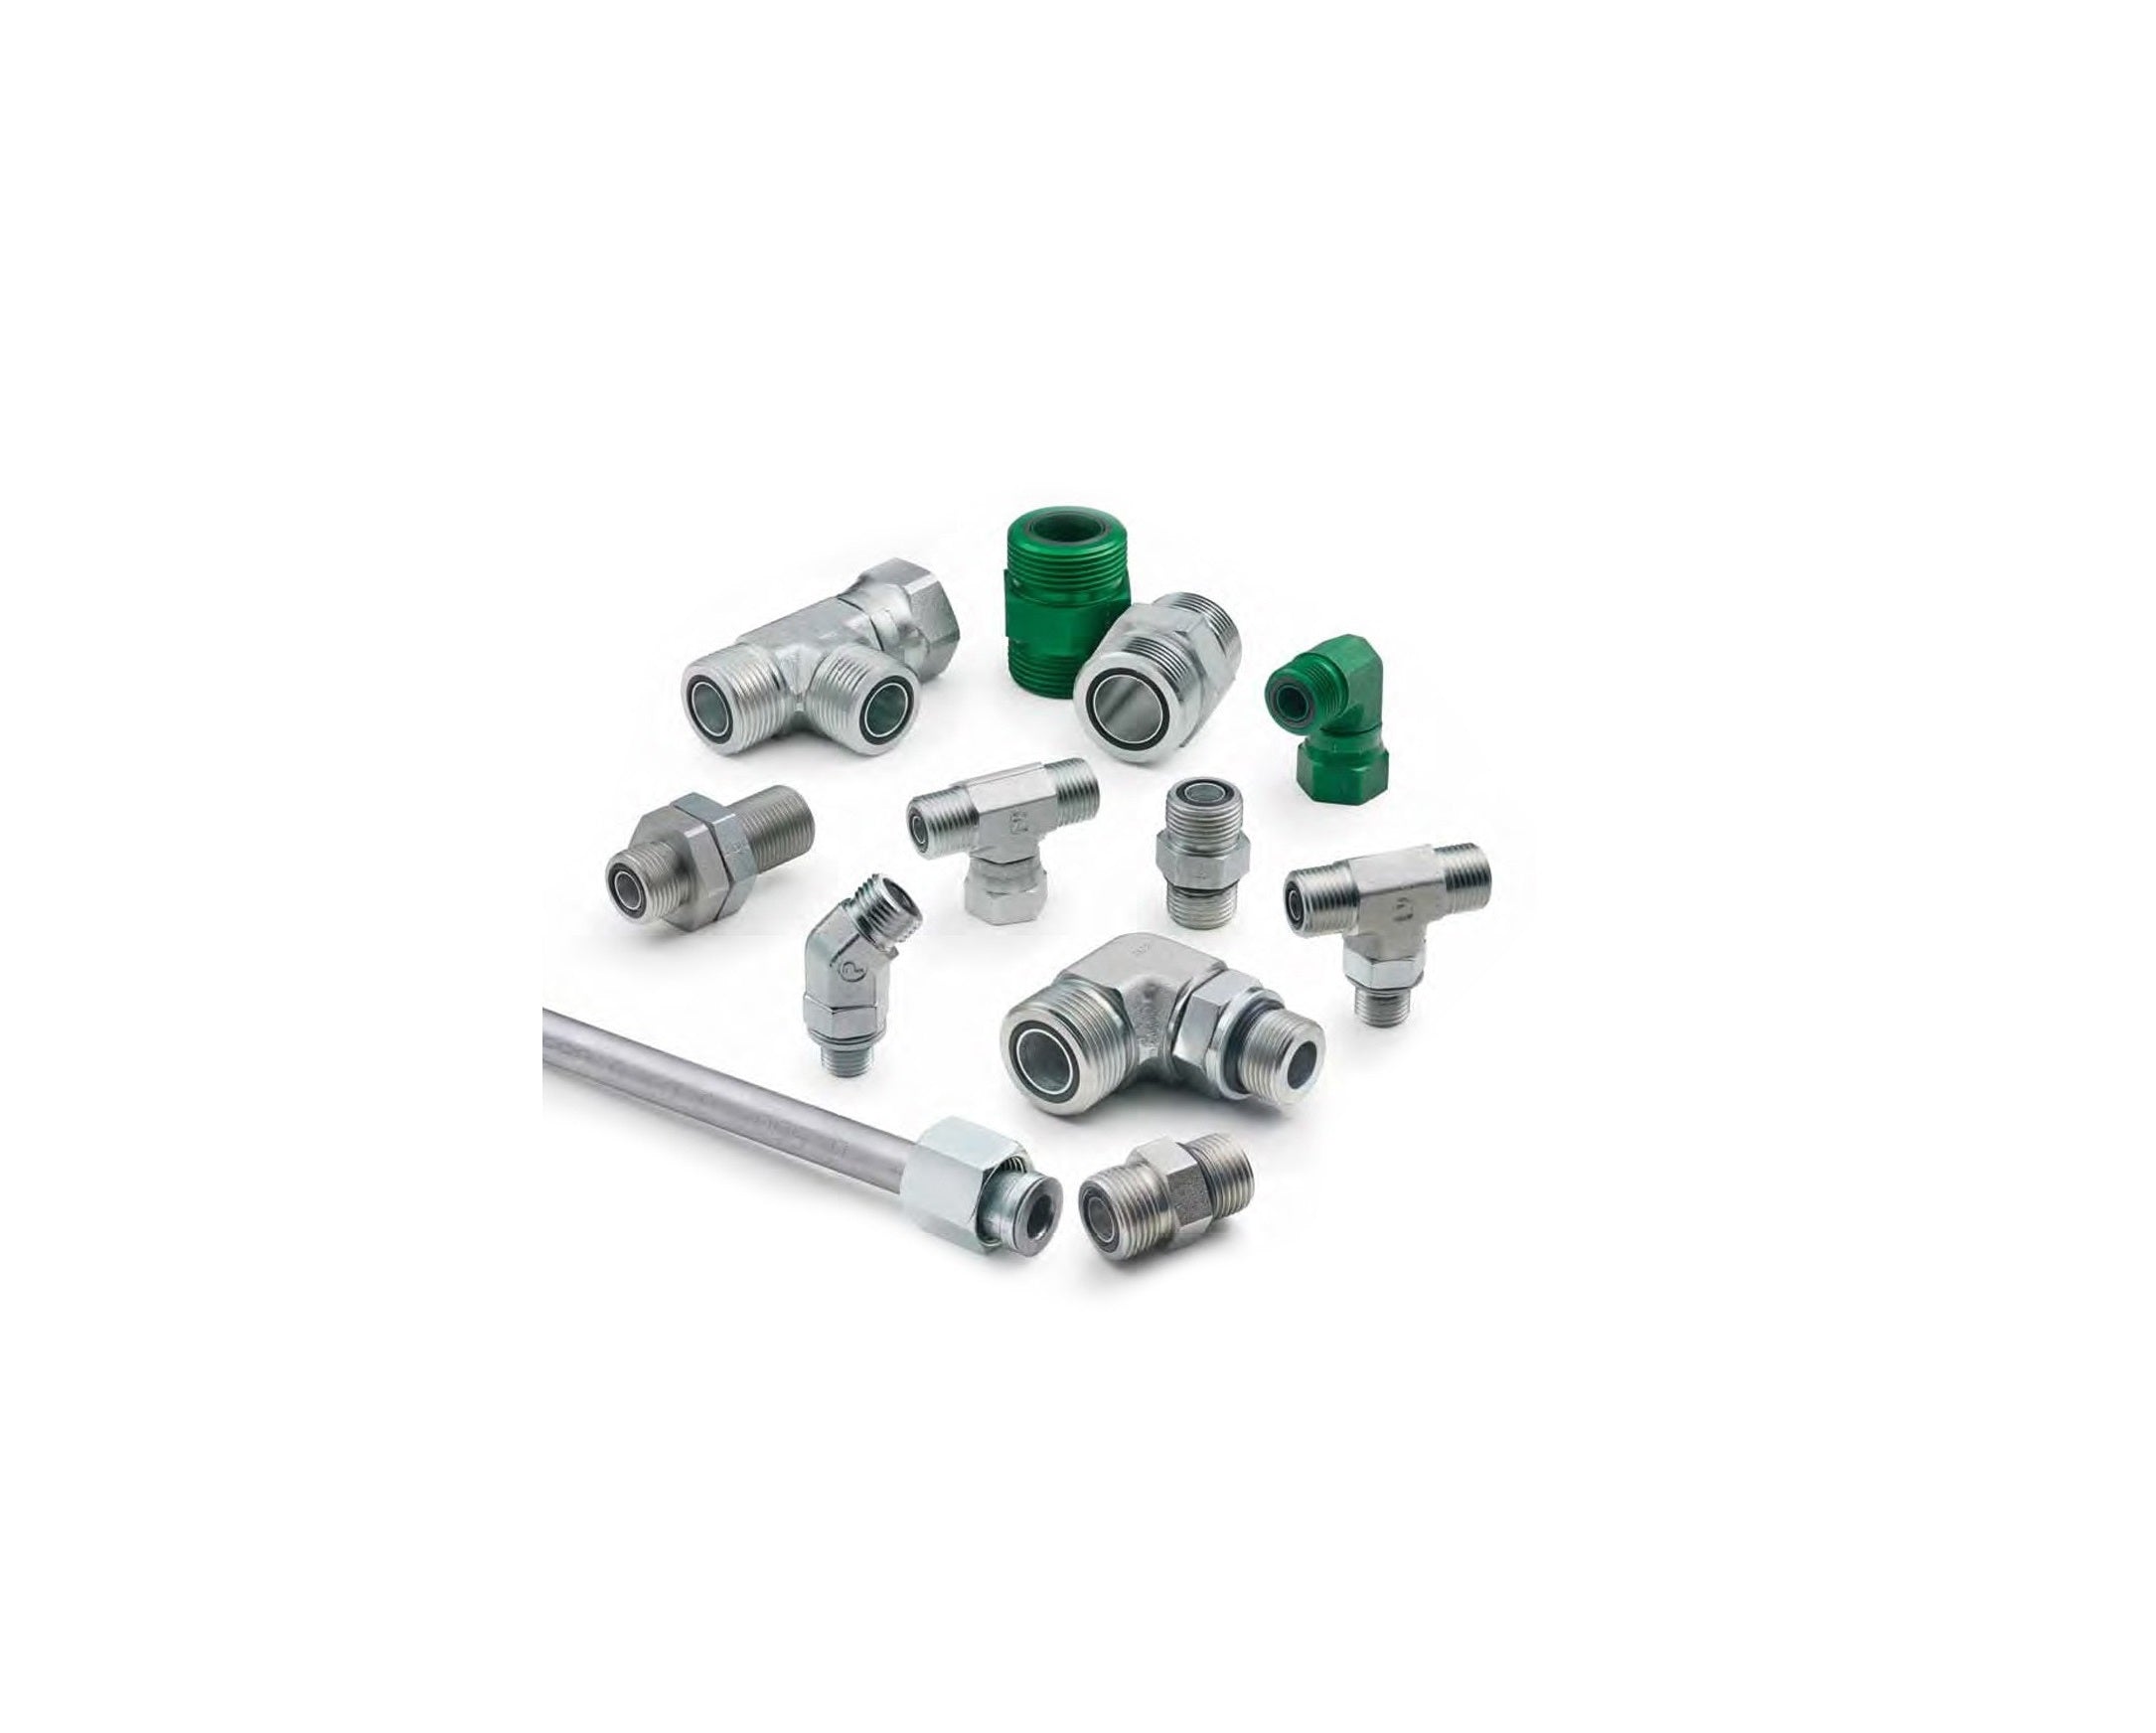 Parker High Pressure Hydraulic Fittings - Parker Ermeto Fittings